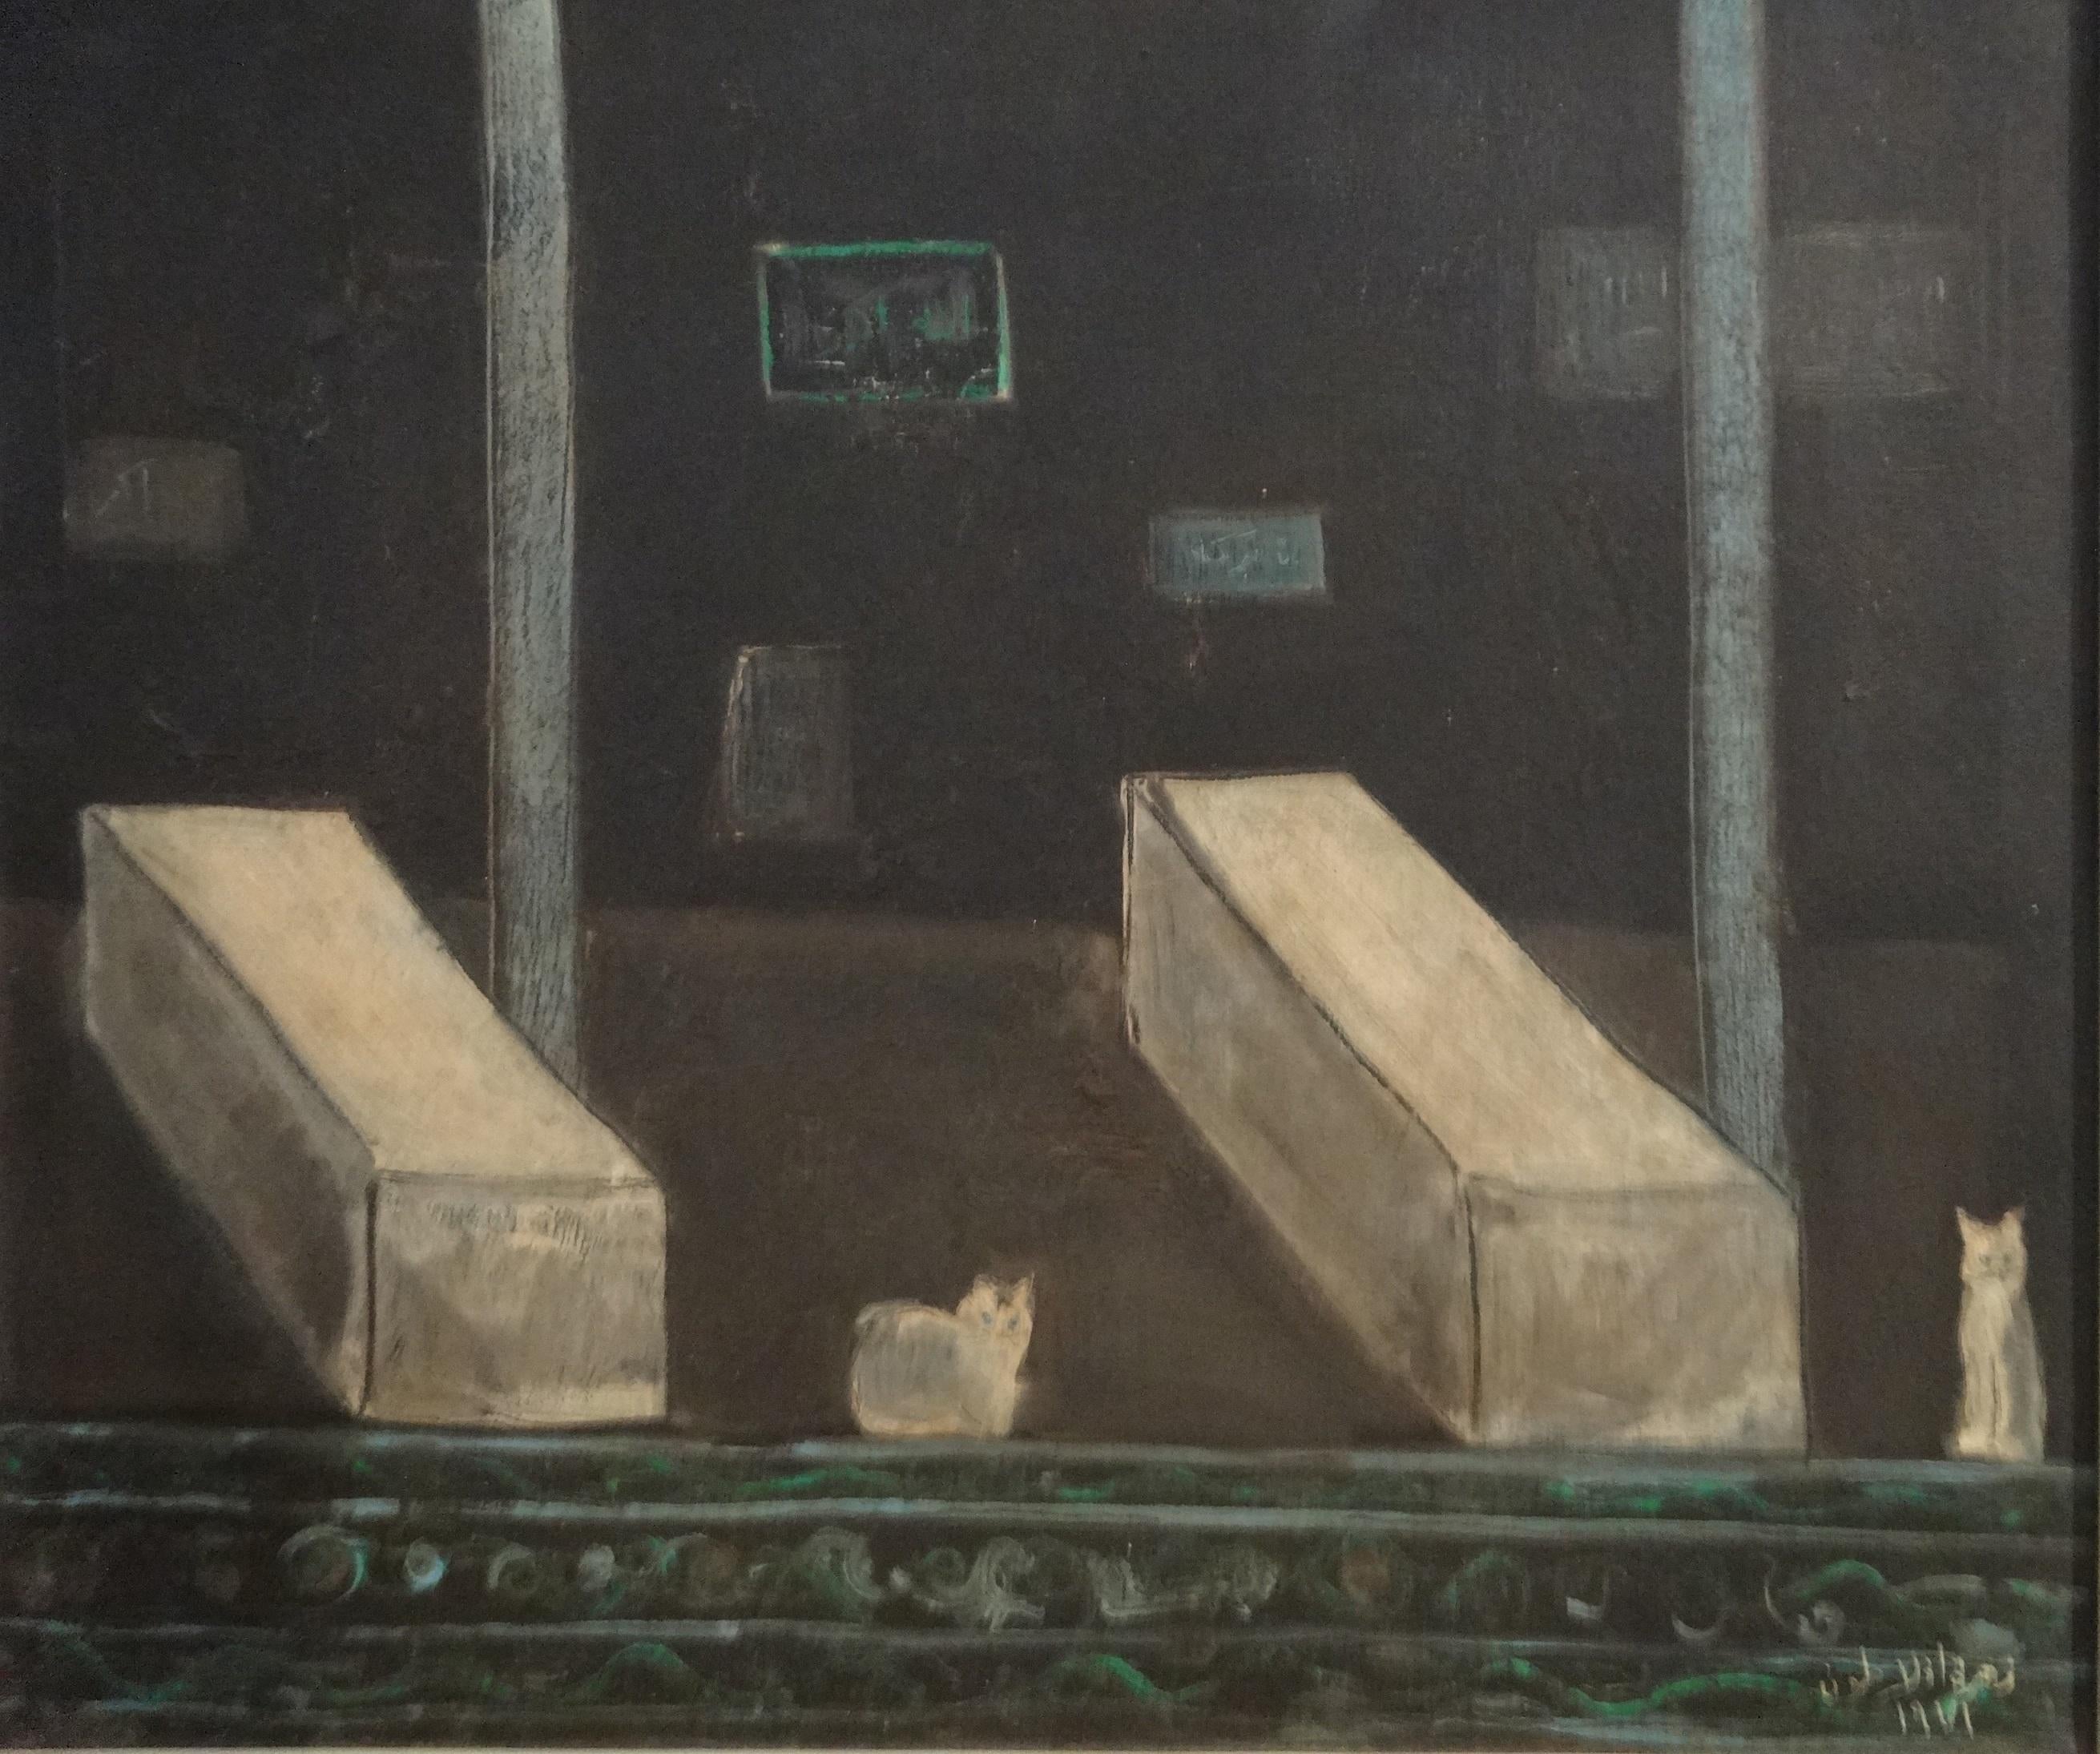 "Cats and Coffins" Oil Painting 15" x 17" inch by Zohra Efflatoun

Zohra Efflatoun came from an artistic family. Her half-sister Inji was a renowned painter from Cairo. Whereas Zohra, who lived in Alexandria, studied under the patronage of the